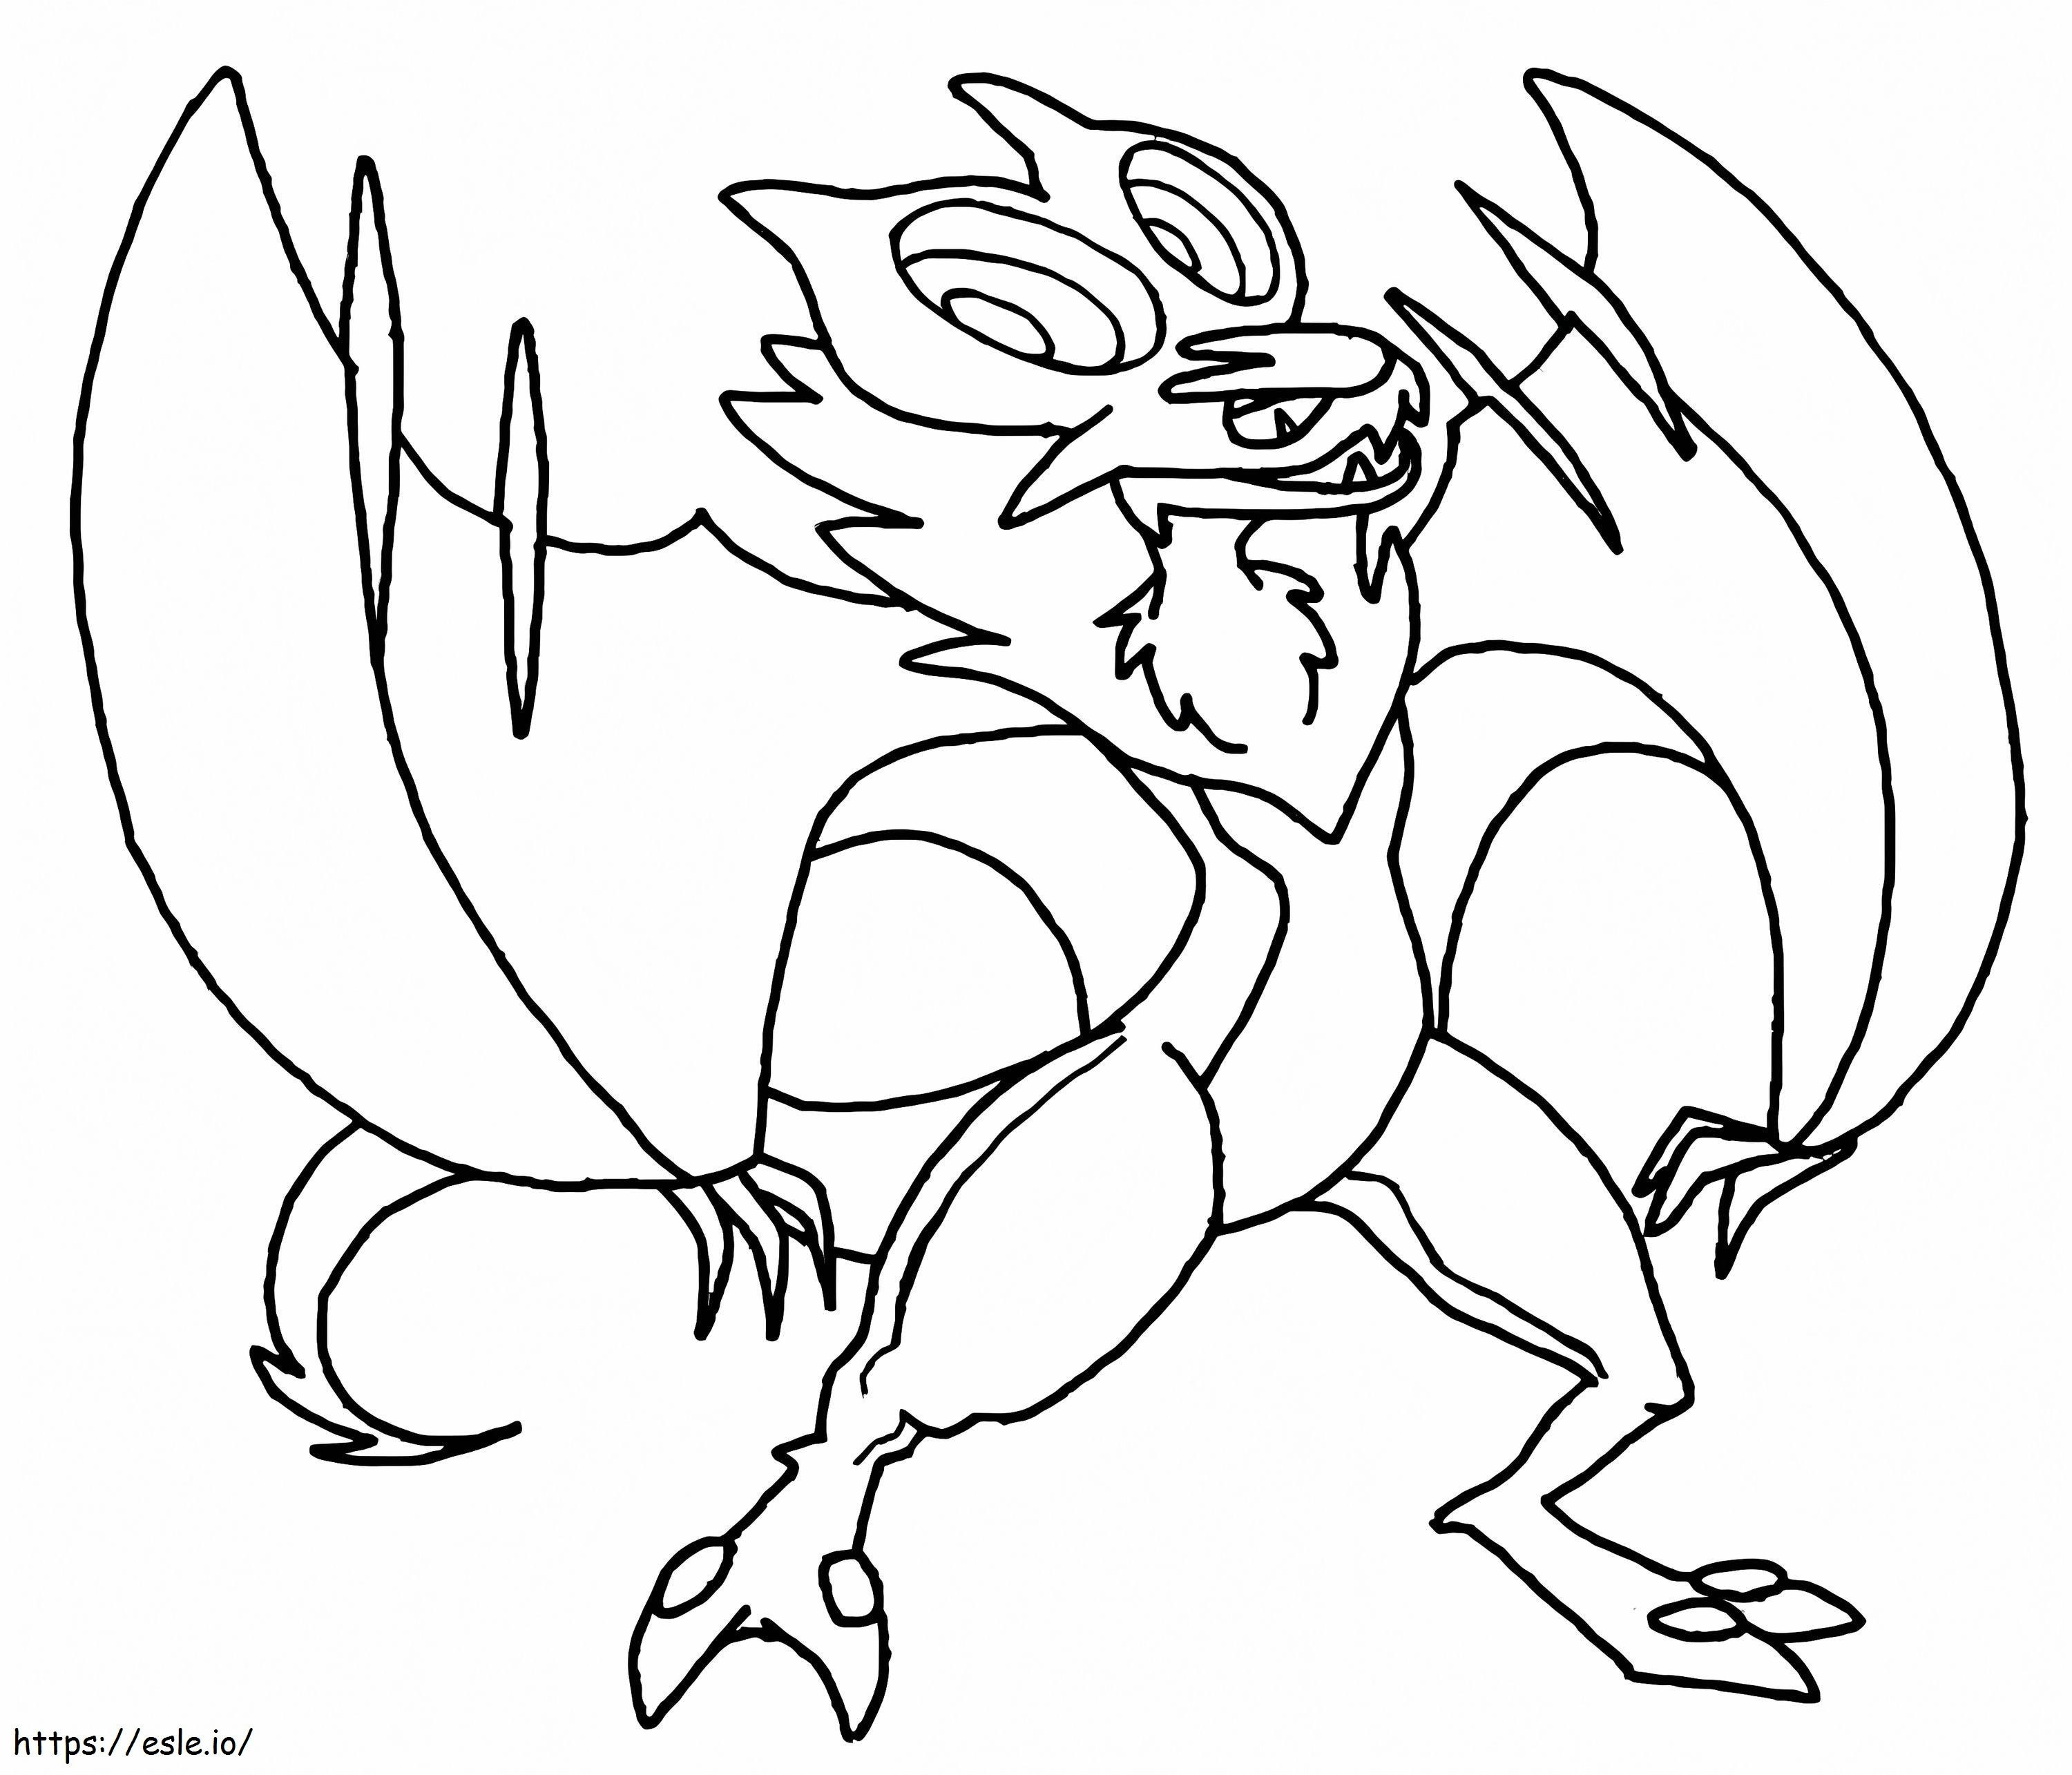 Printable Noivern coloring page